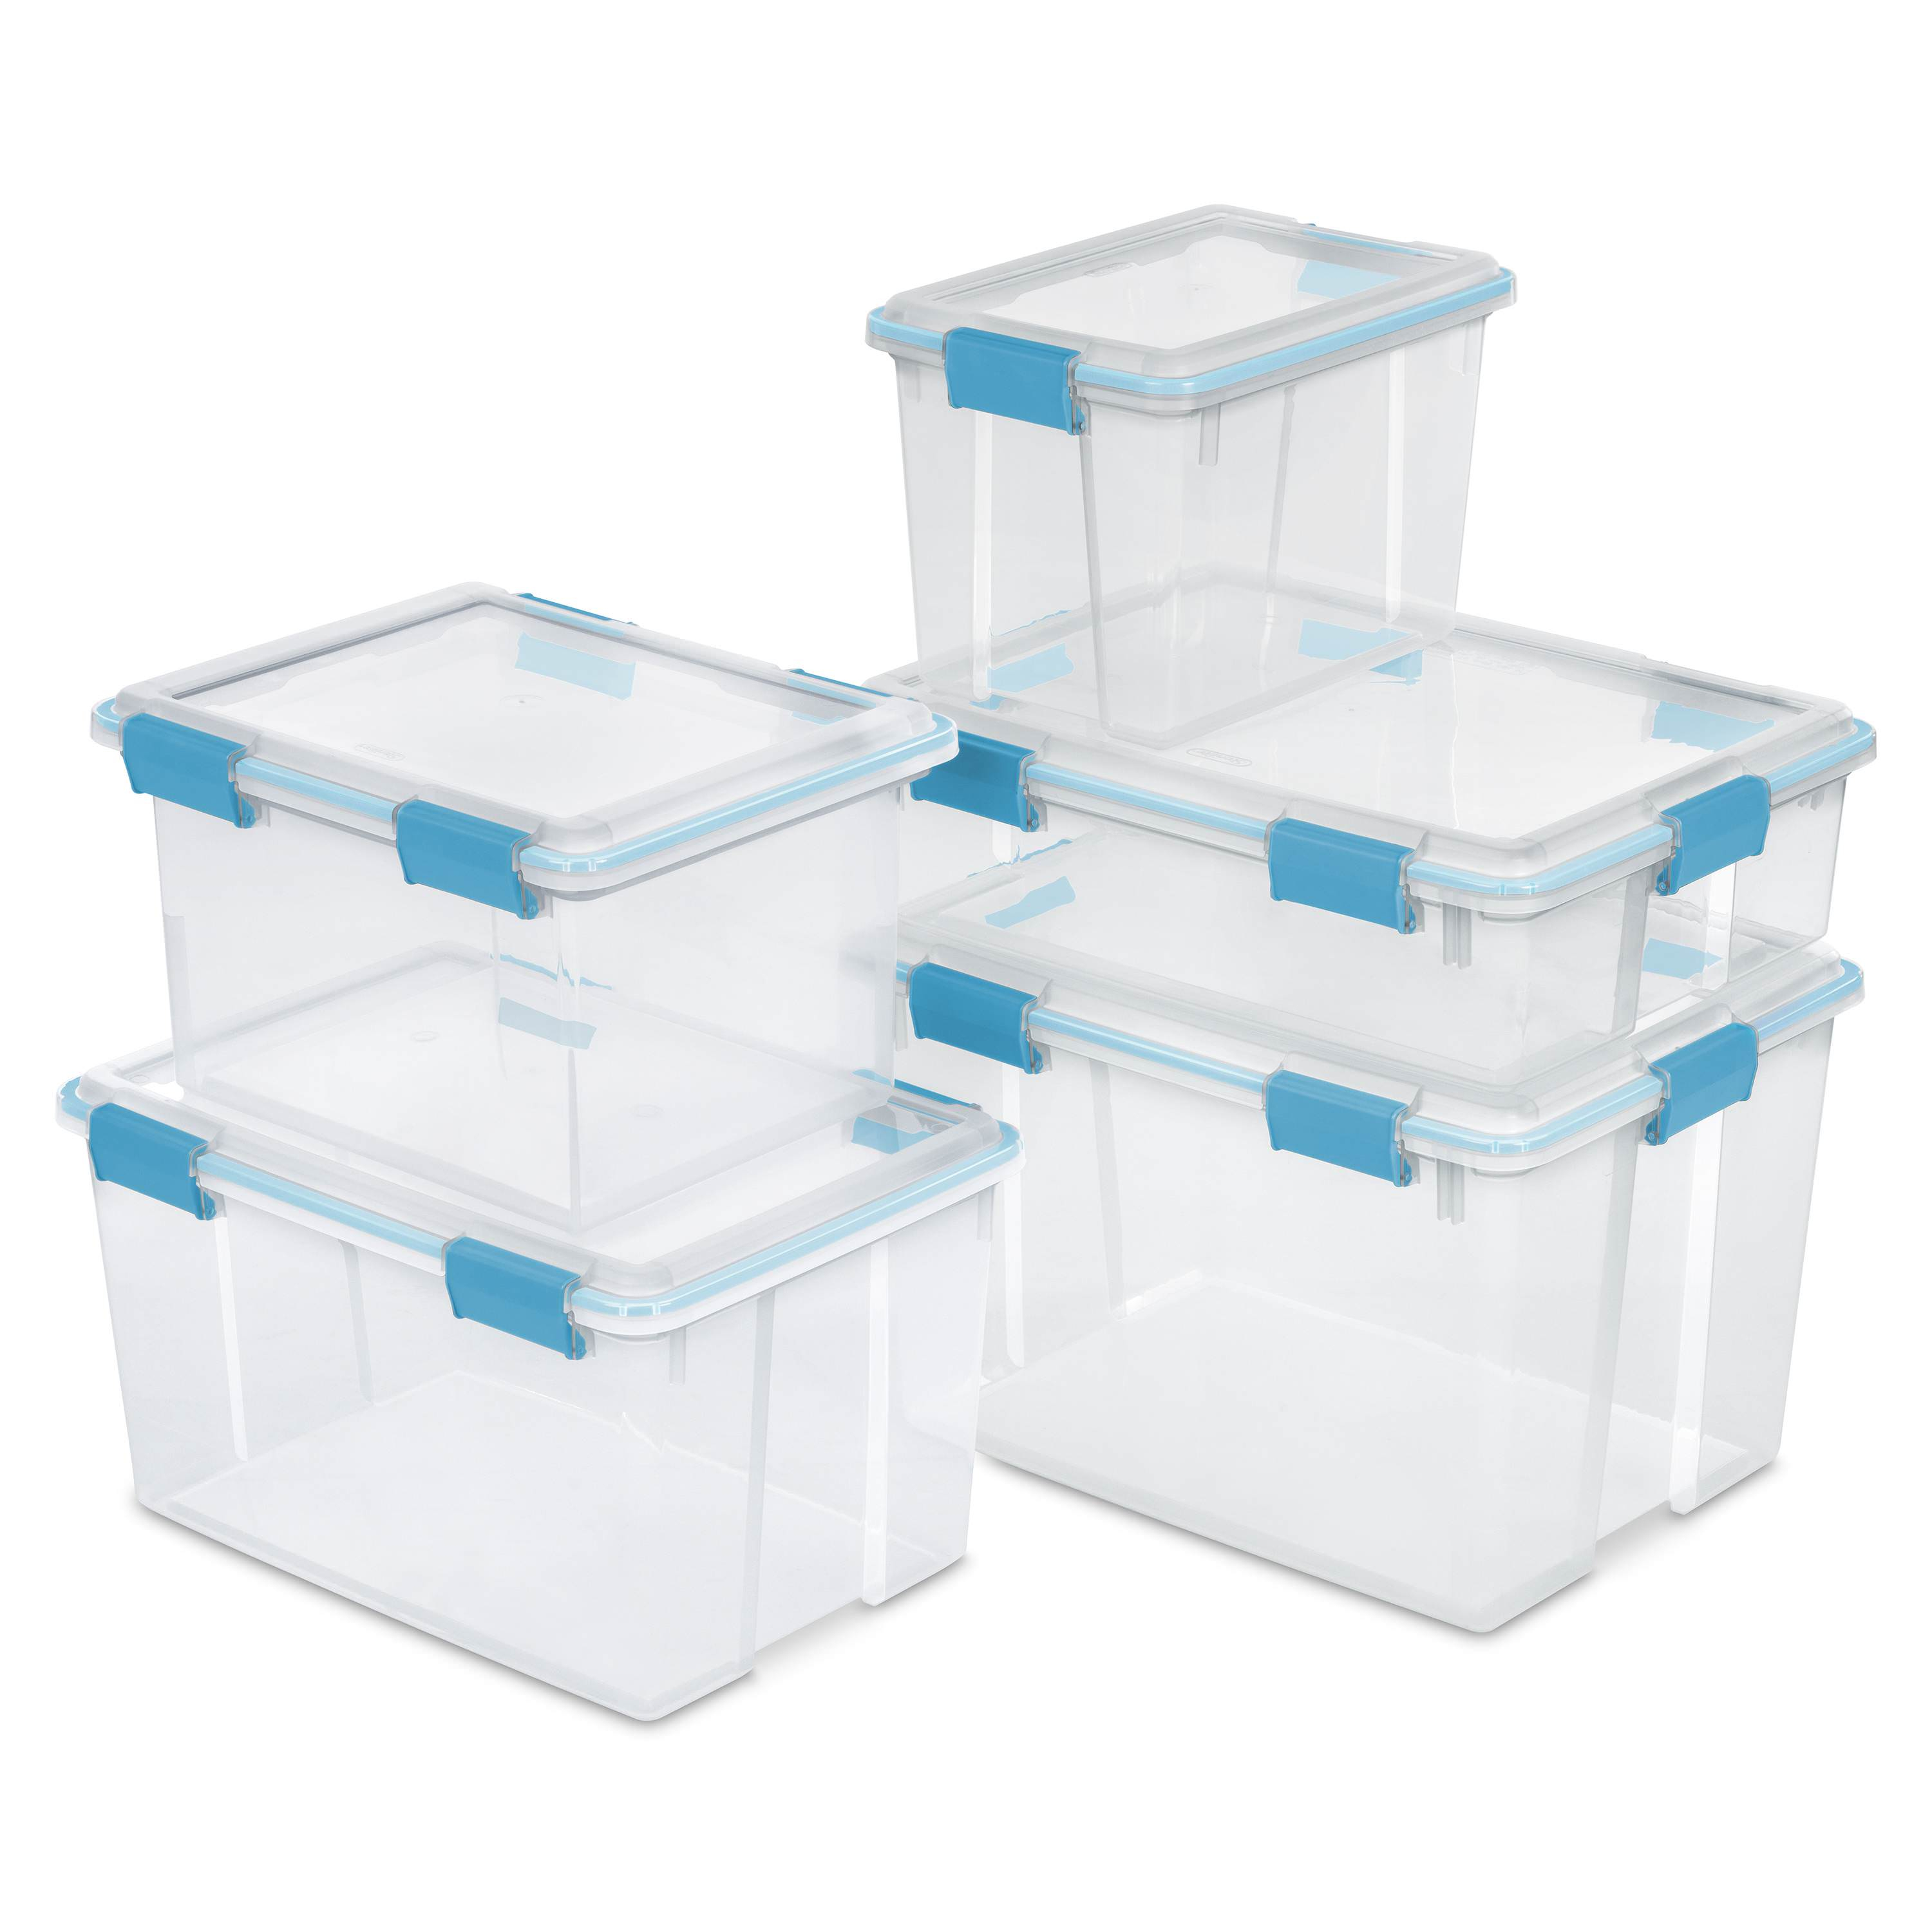 Sterilite Gasket Box Collection Walmart intended for proportions 3000 X 3000